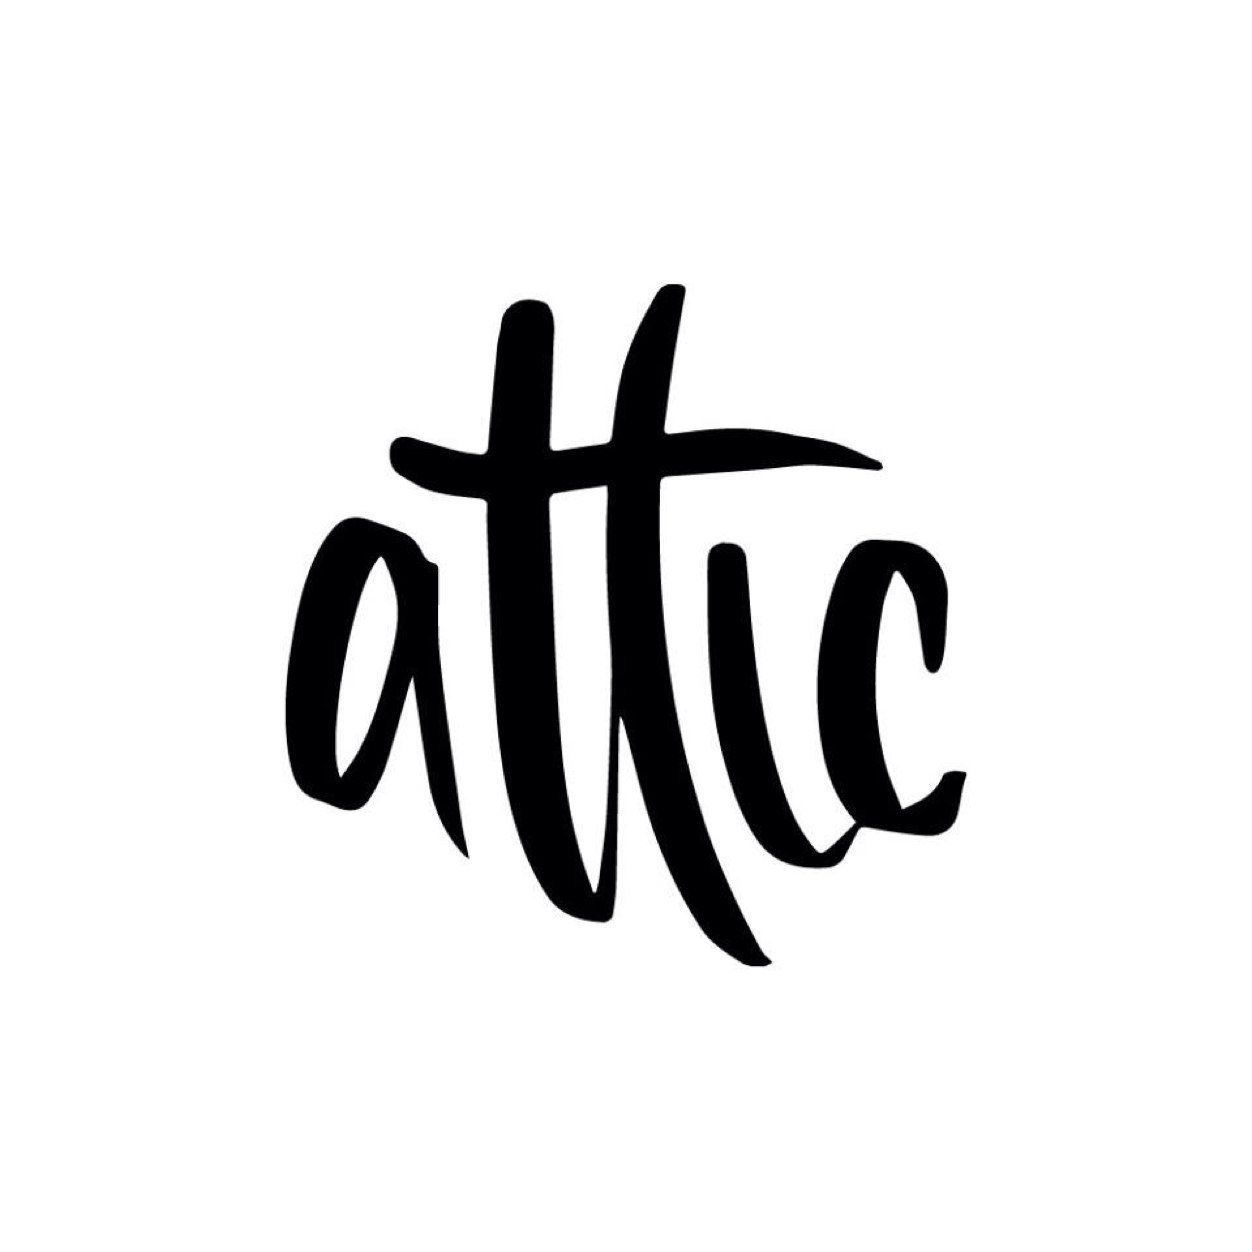 The first premium blogging agency in Belgium. Brand mediation, monetizing, content creation. Join #TeamAttic now.